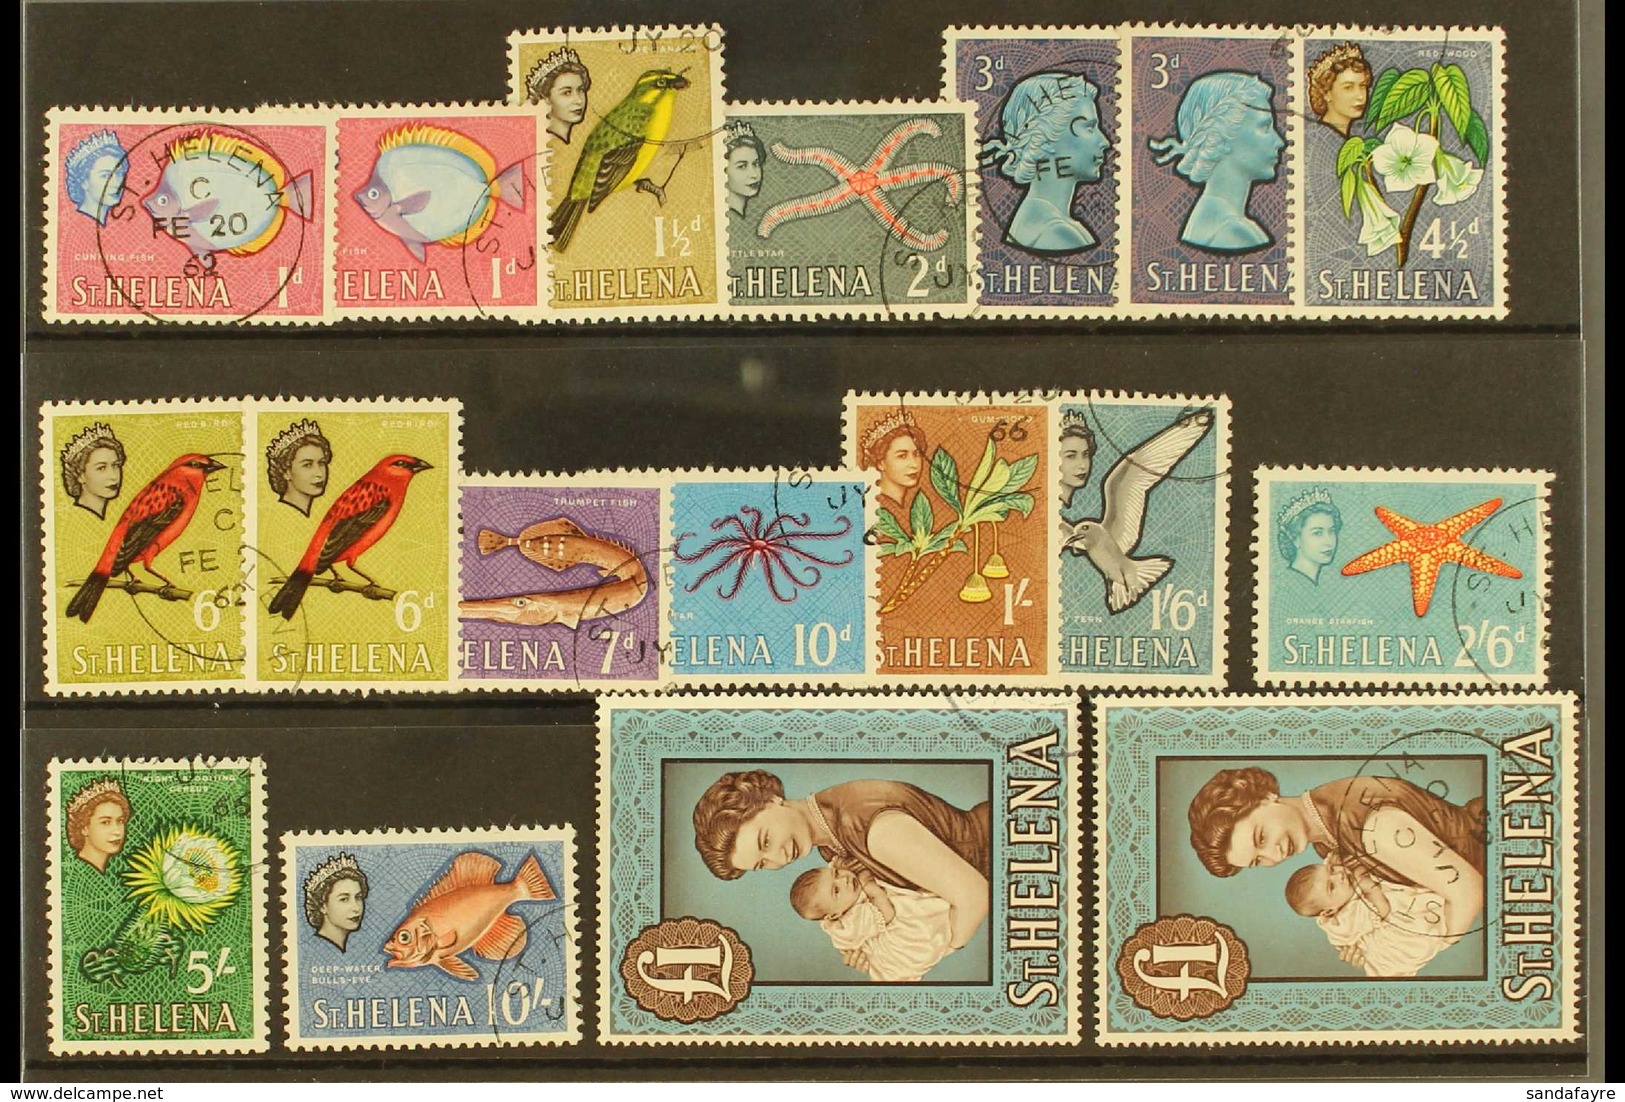 1961-65 Pictorial Definitive Set With Most Addition Chalky Paper Variants, SG 176/89, Fine Used (18 Stamps) For More Ima - St. Helena